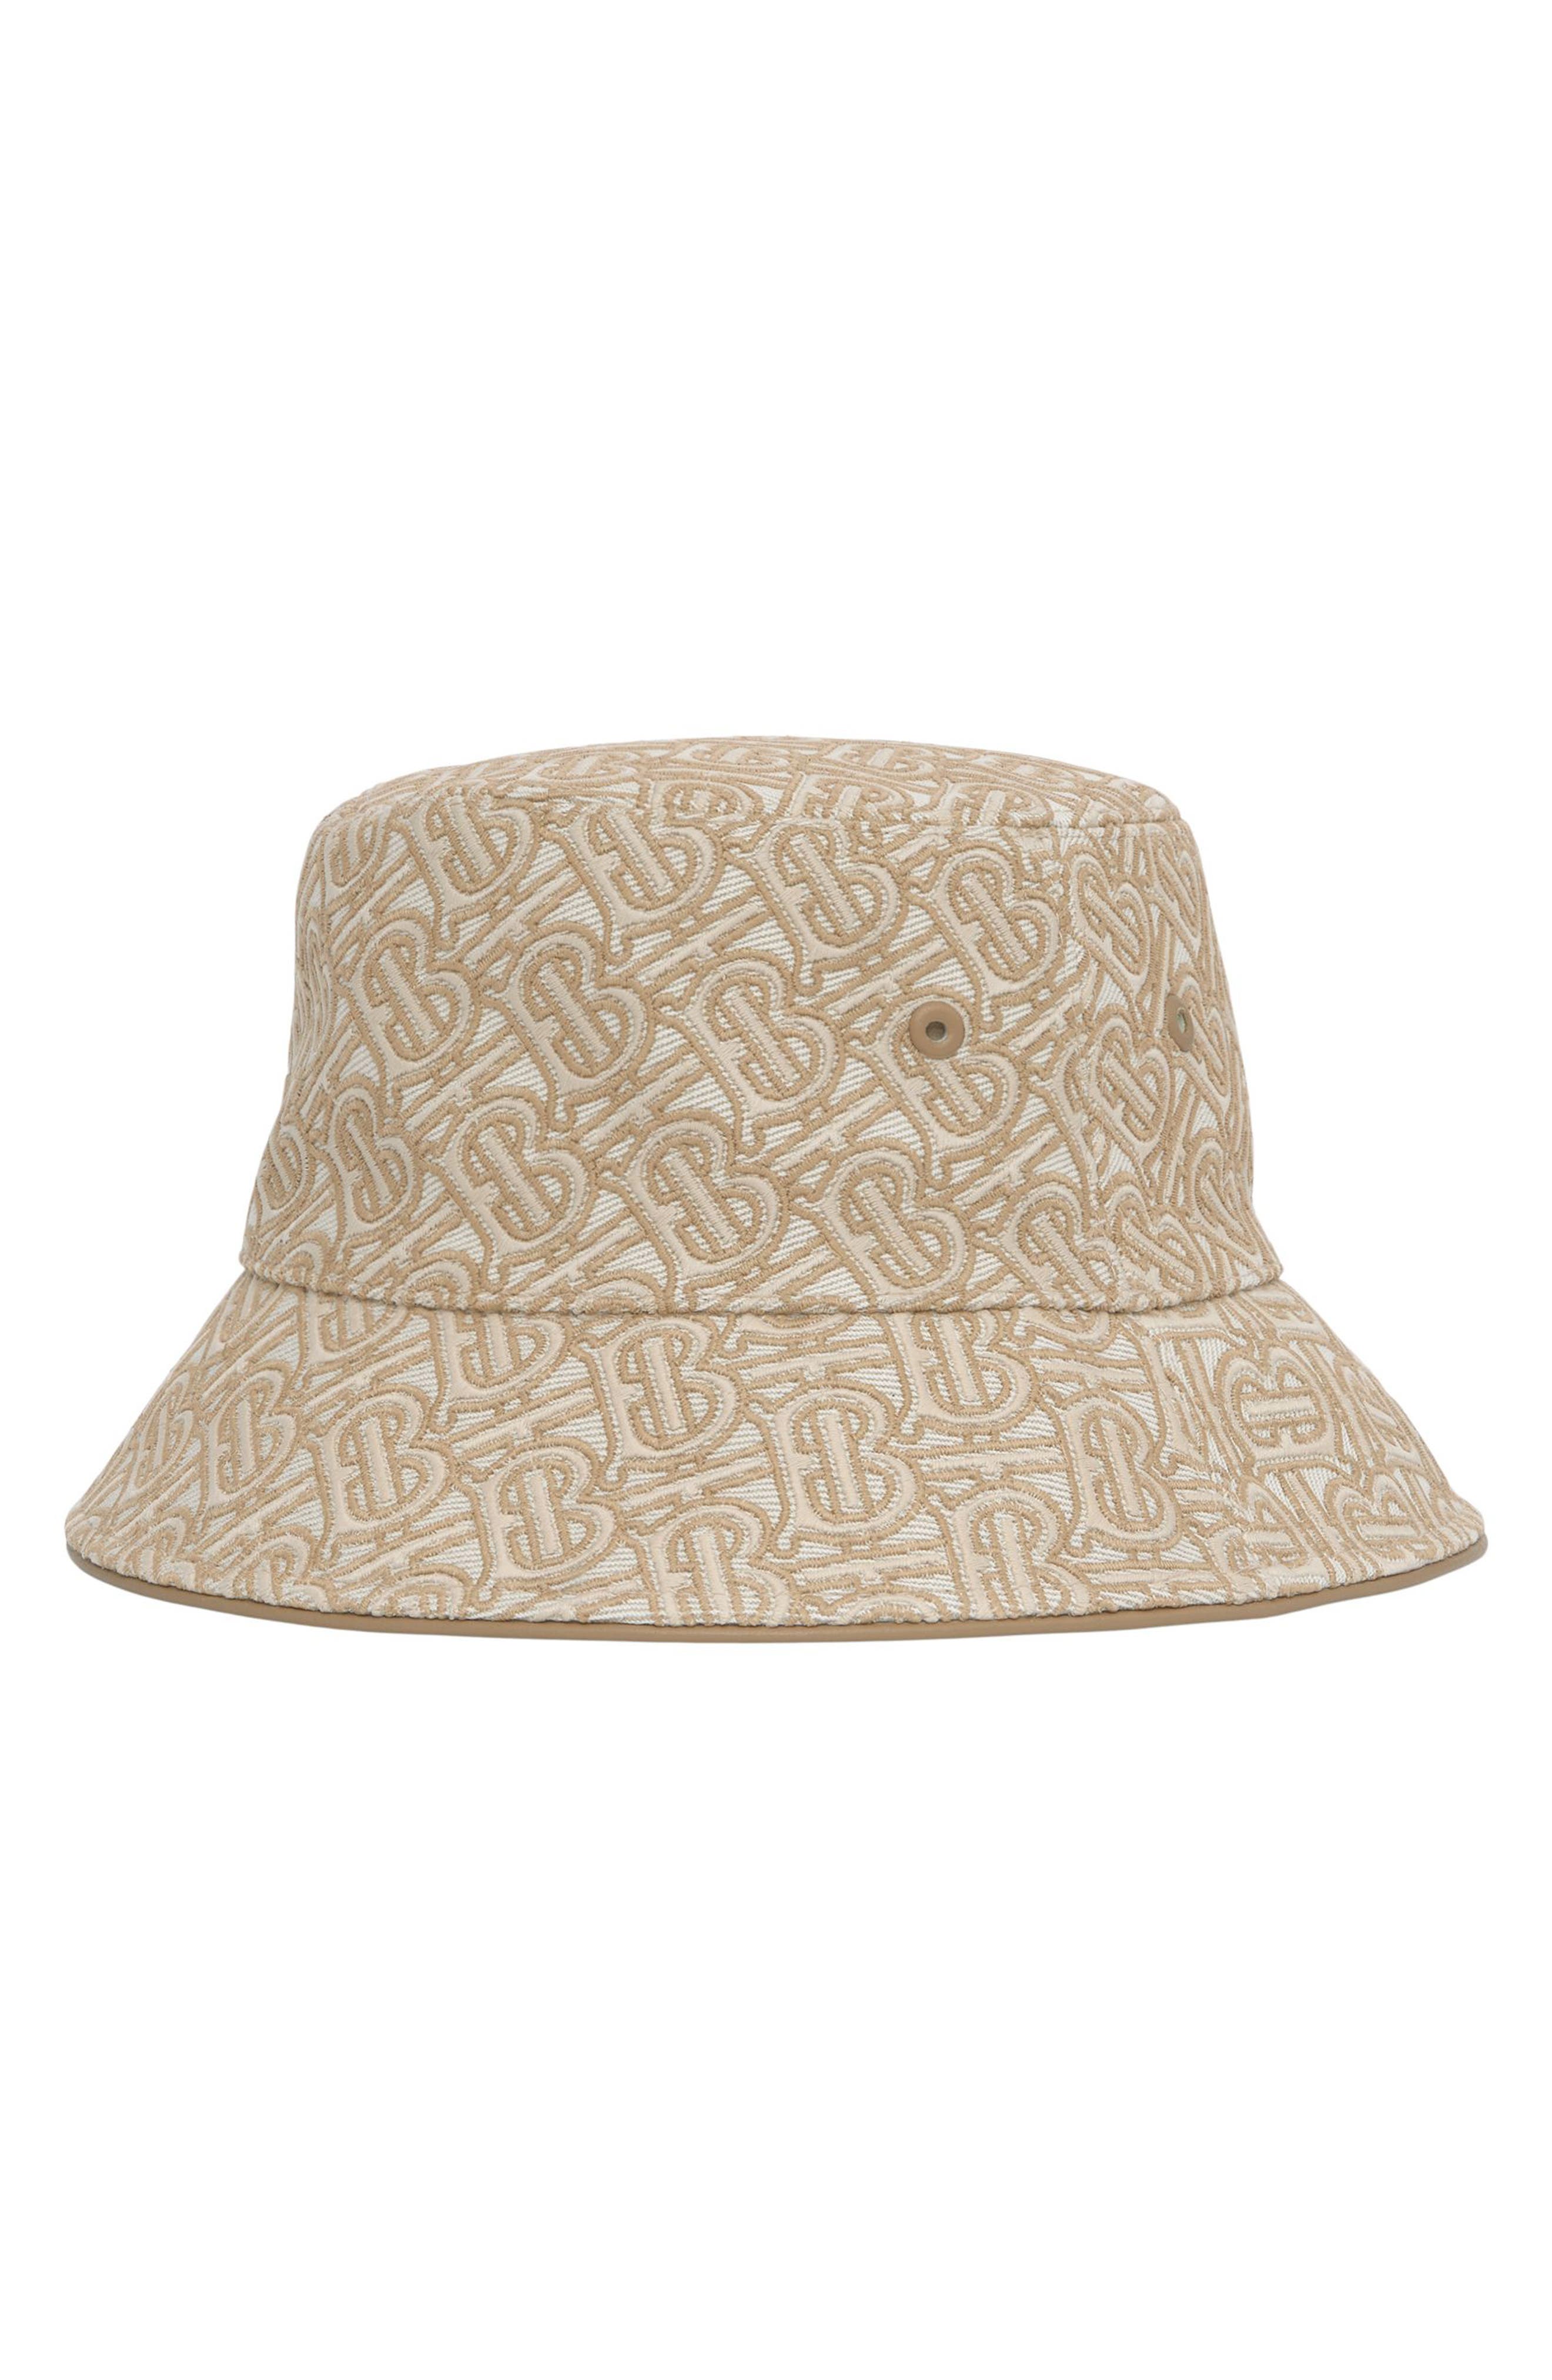 Burberry Embroidered TB Monogram Canvas Bucket Hat in Tb Tan /Soft Fawn at Nordstrom, Size Small